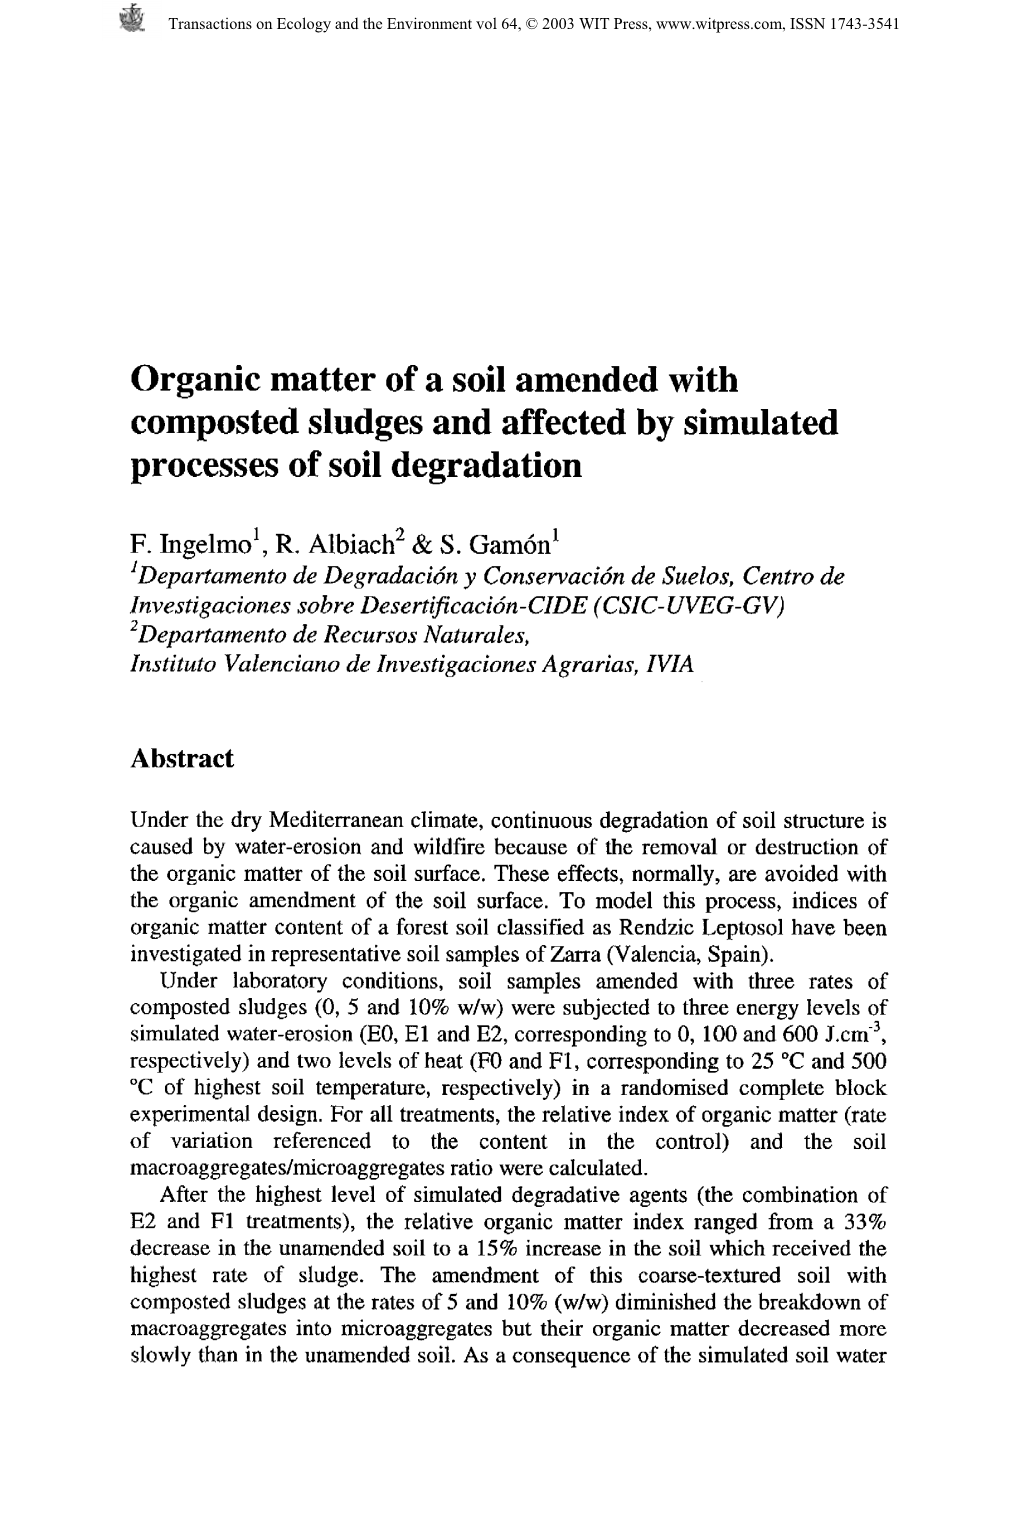 Organic Matter of a Soil Amended with Composted Sludges and Affected by Simulated Processes of Soil Degradation